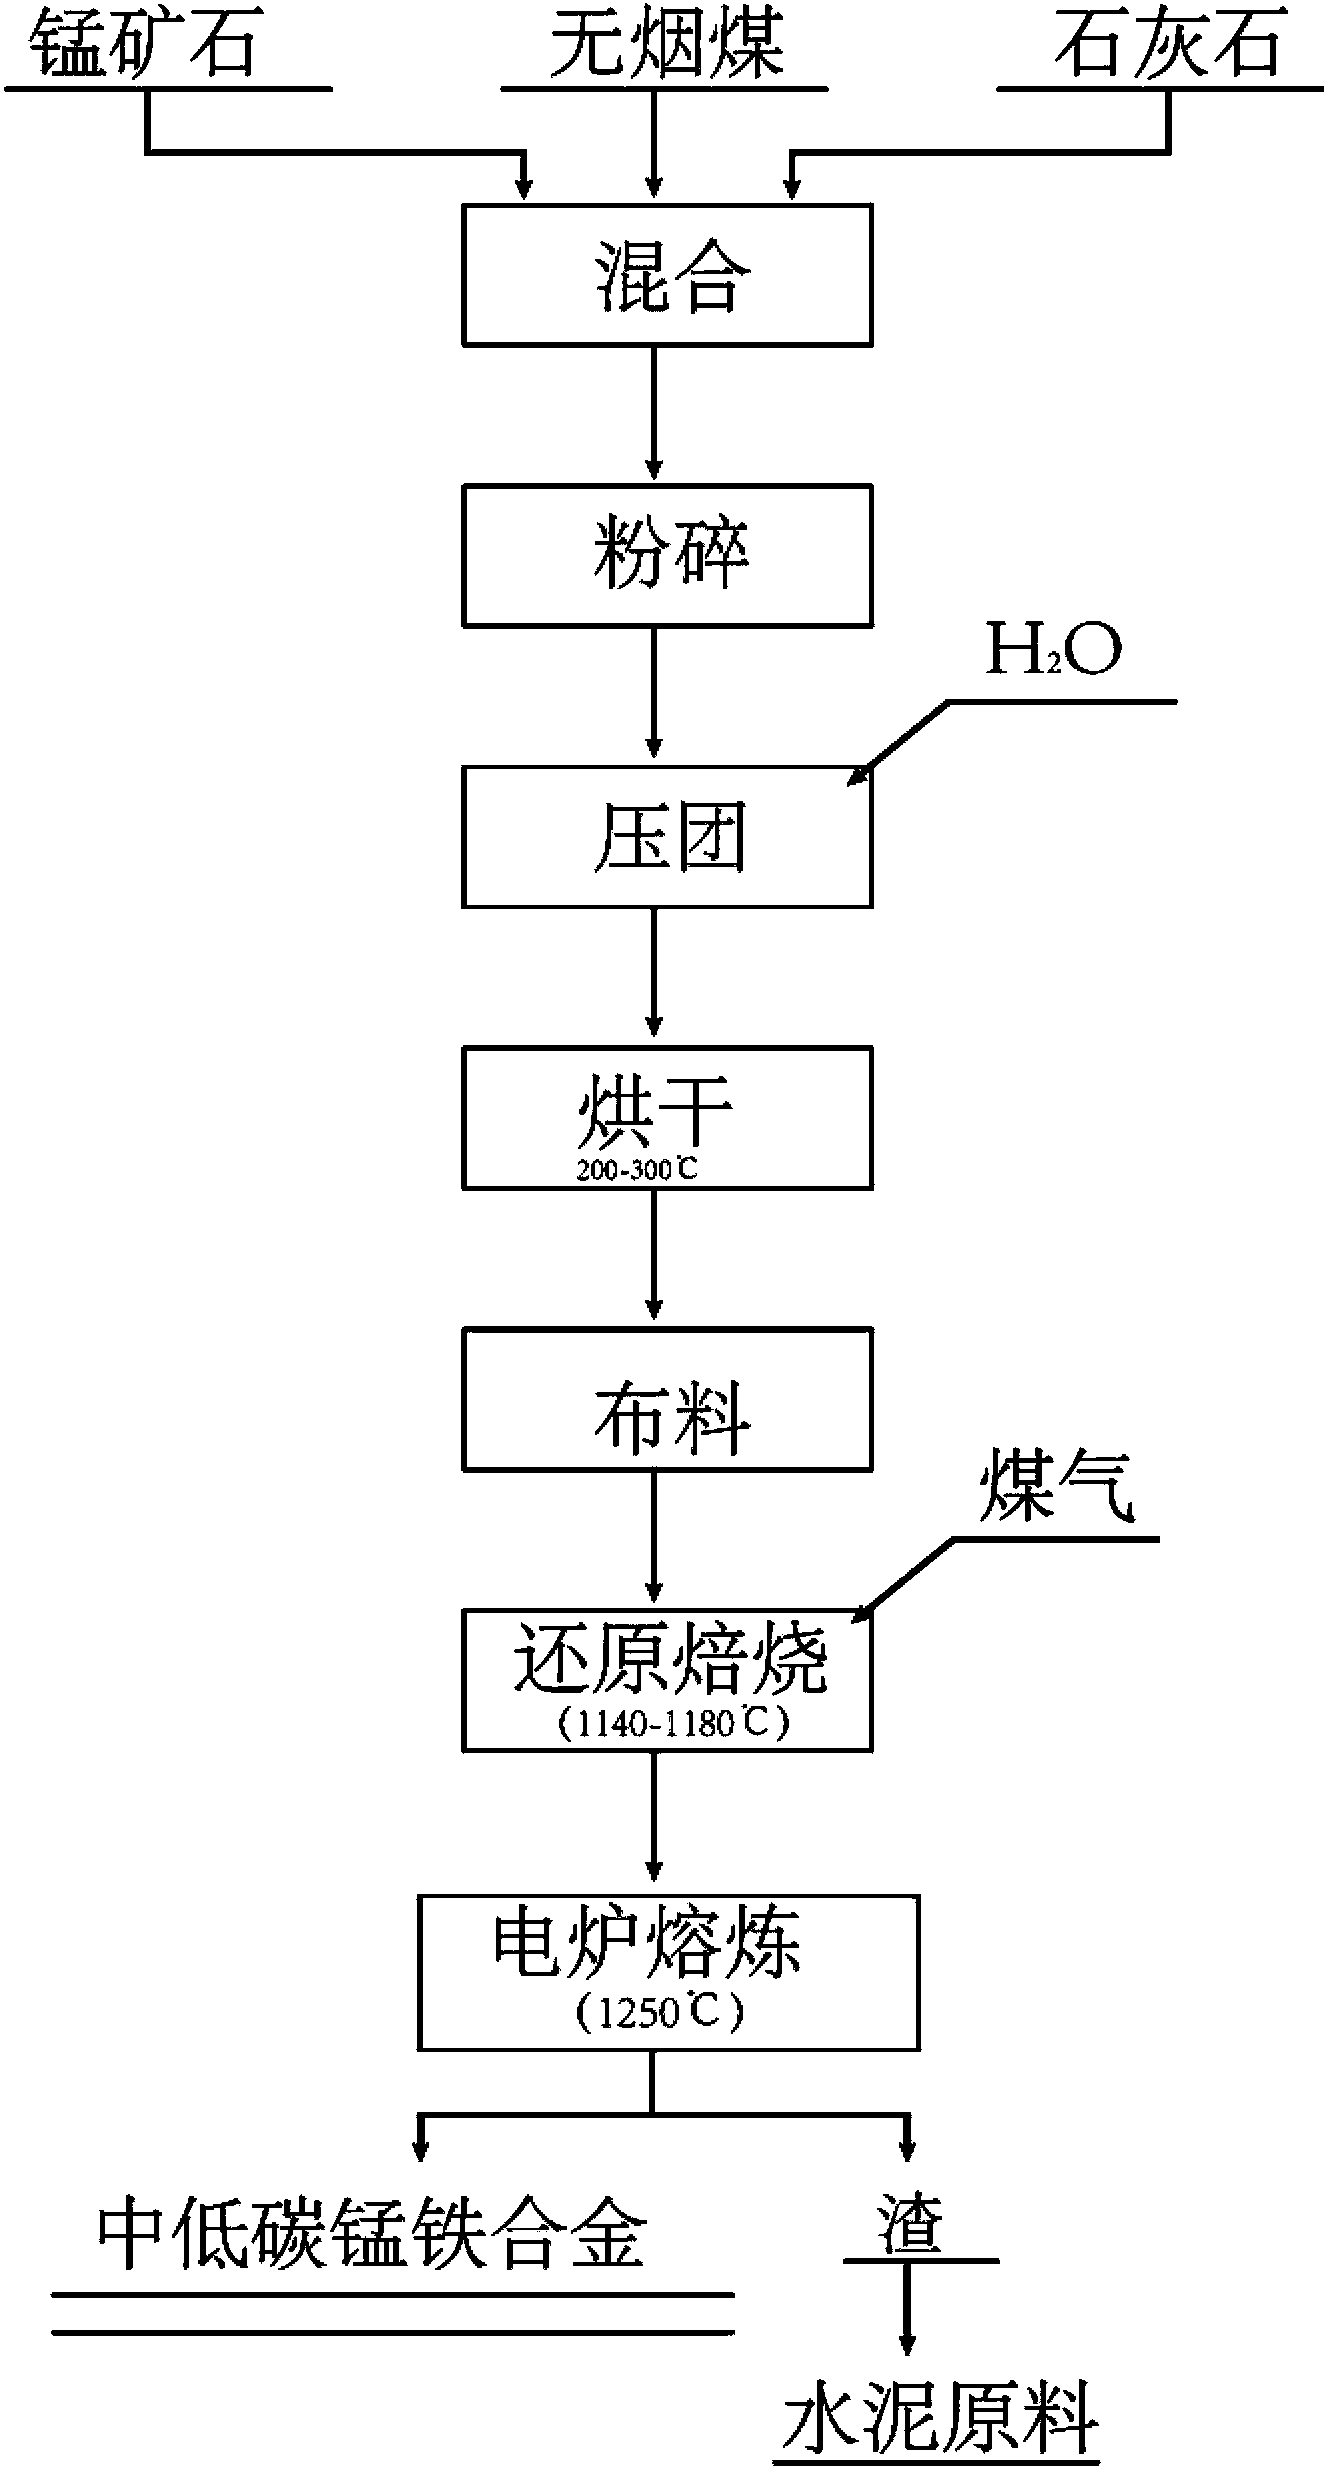 Direct reduction method for producing medium-and-low-carbon manganese-iron alloy